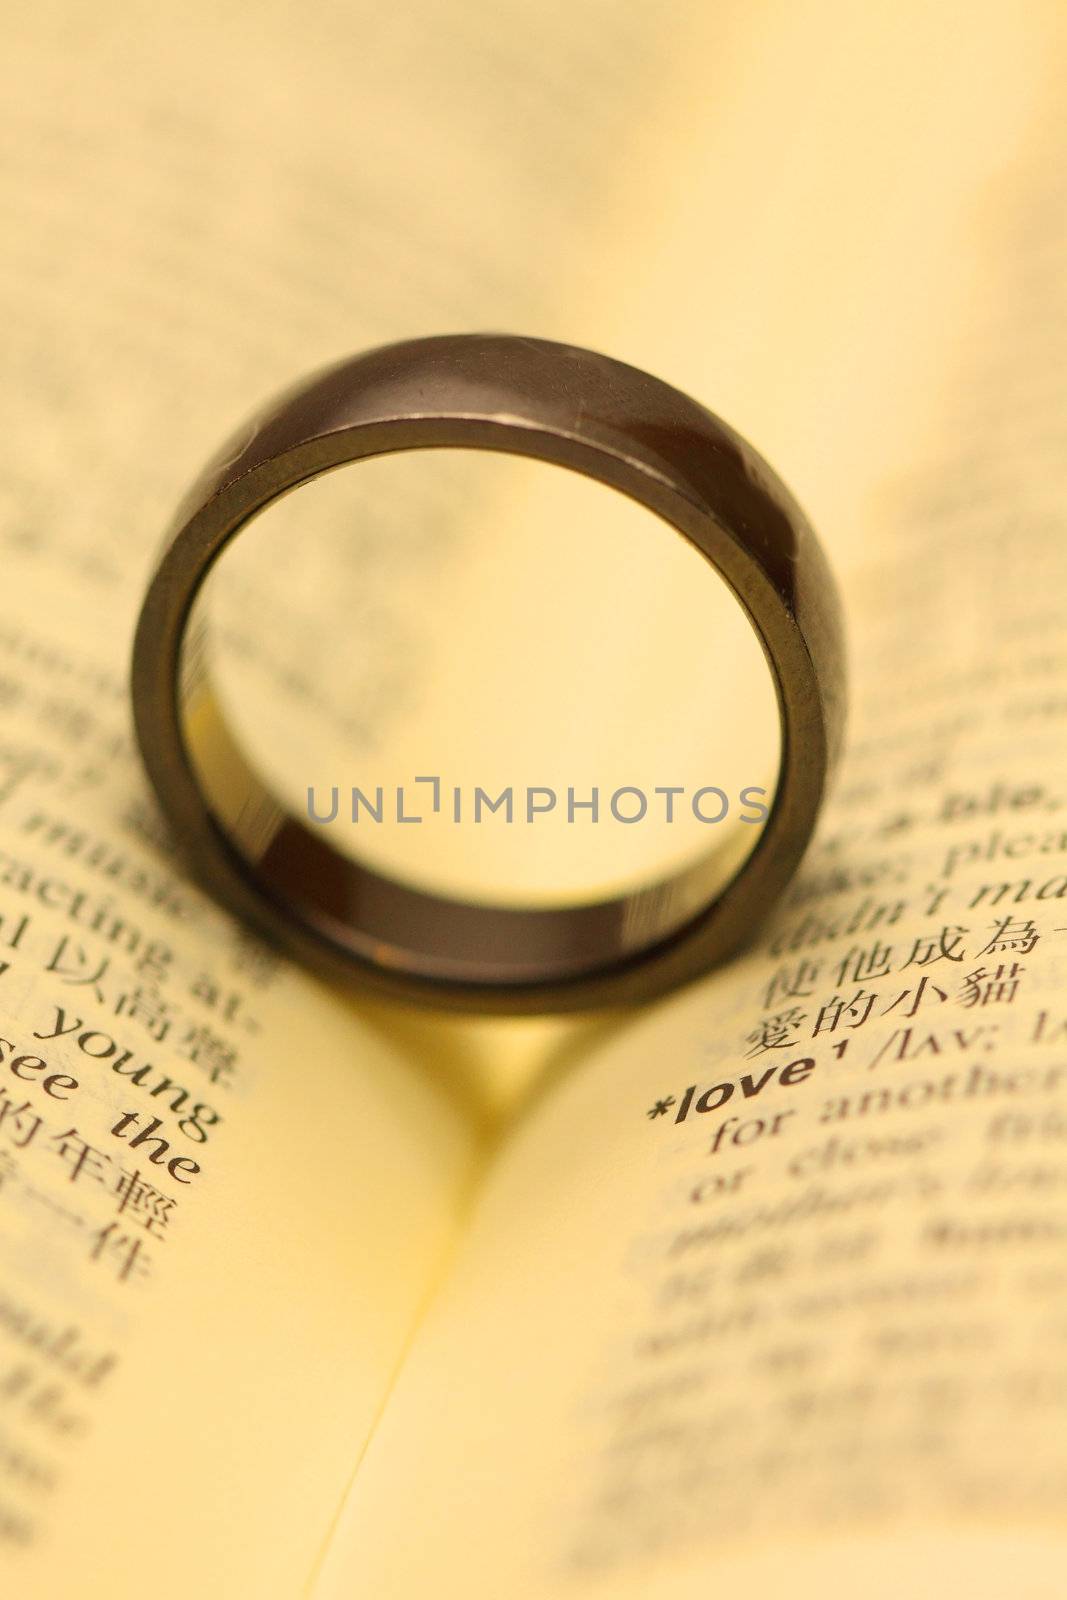 Love in all around: a ring with a word "LOVE". by kawing921